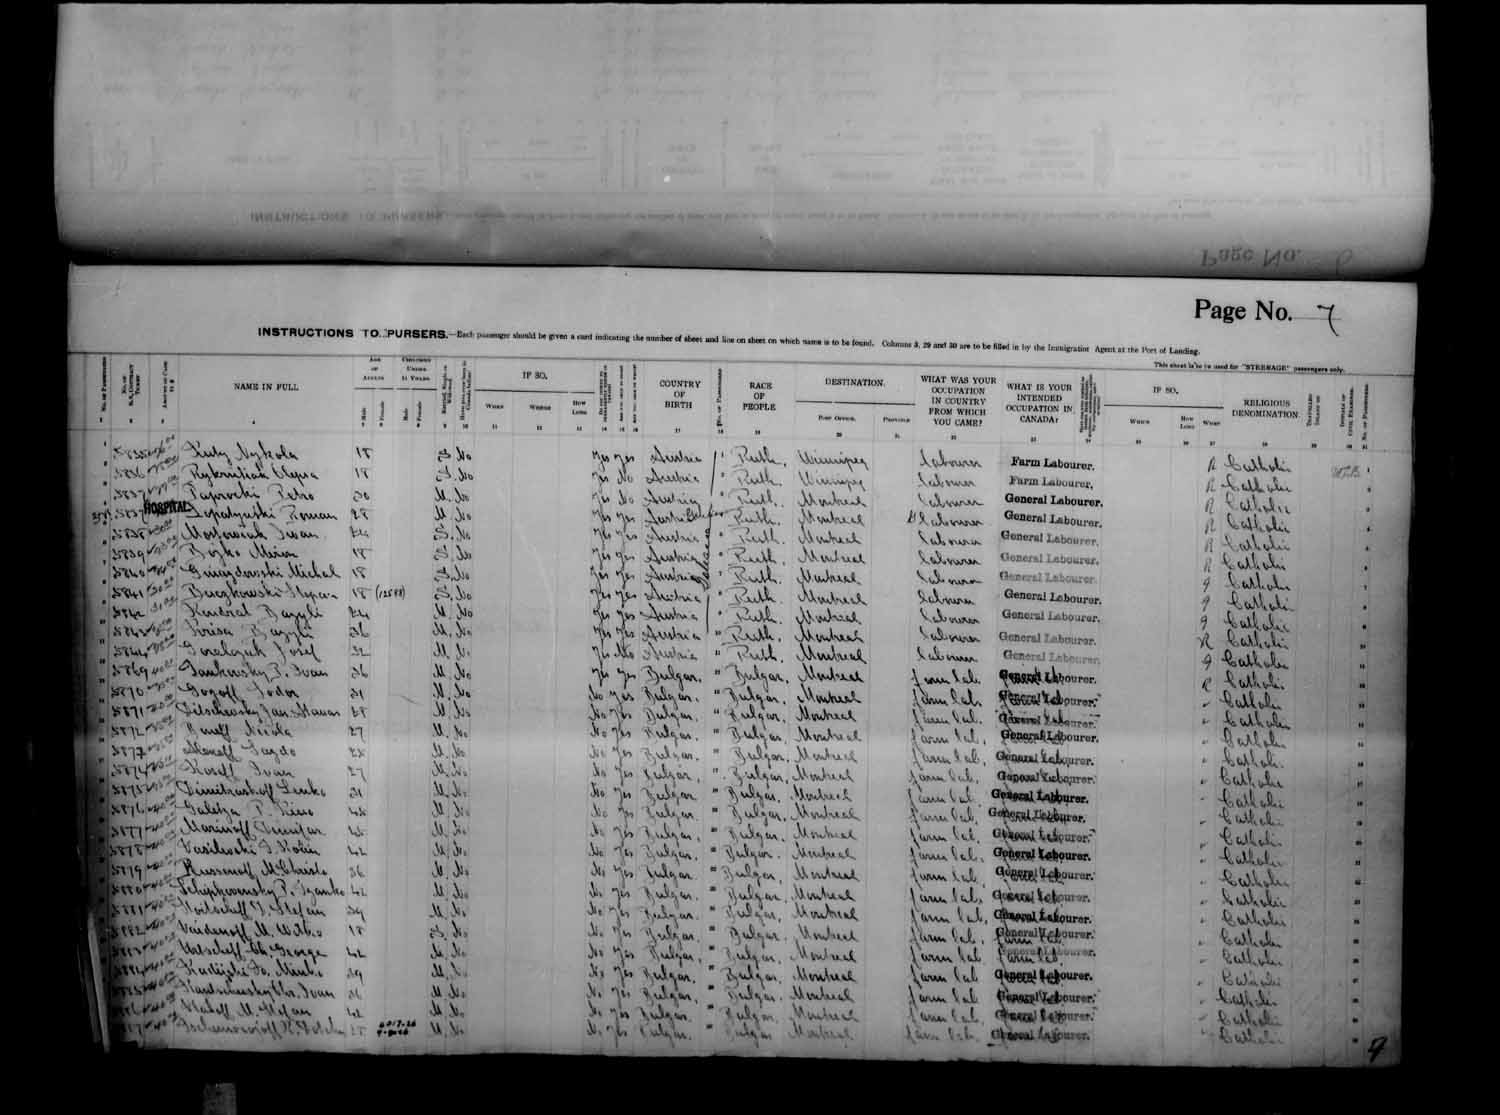 Digitized page of Passenger Lists for Image No.: e003686915